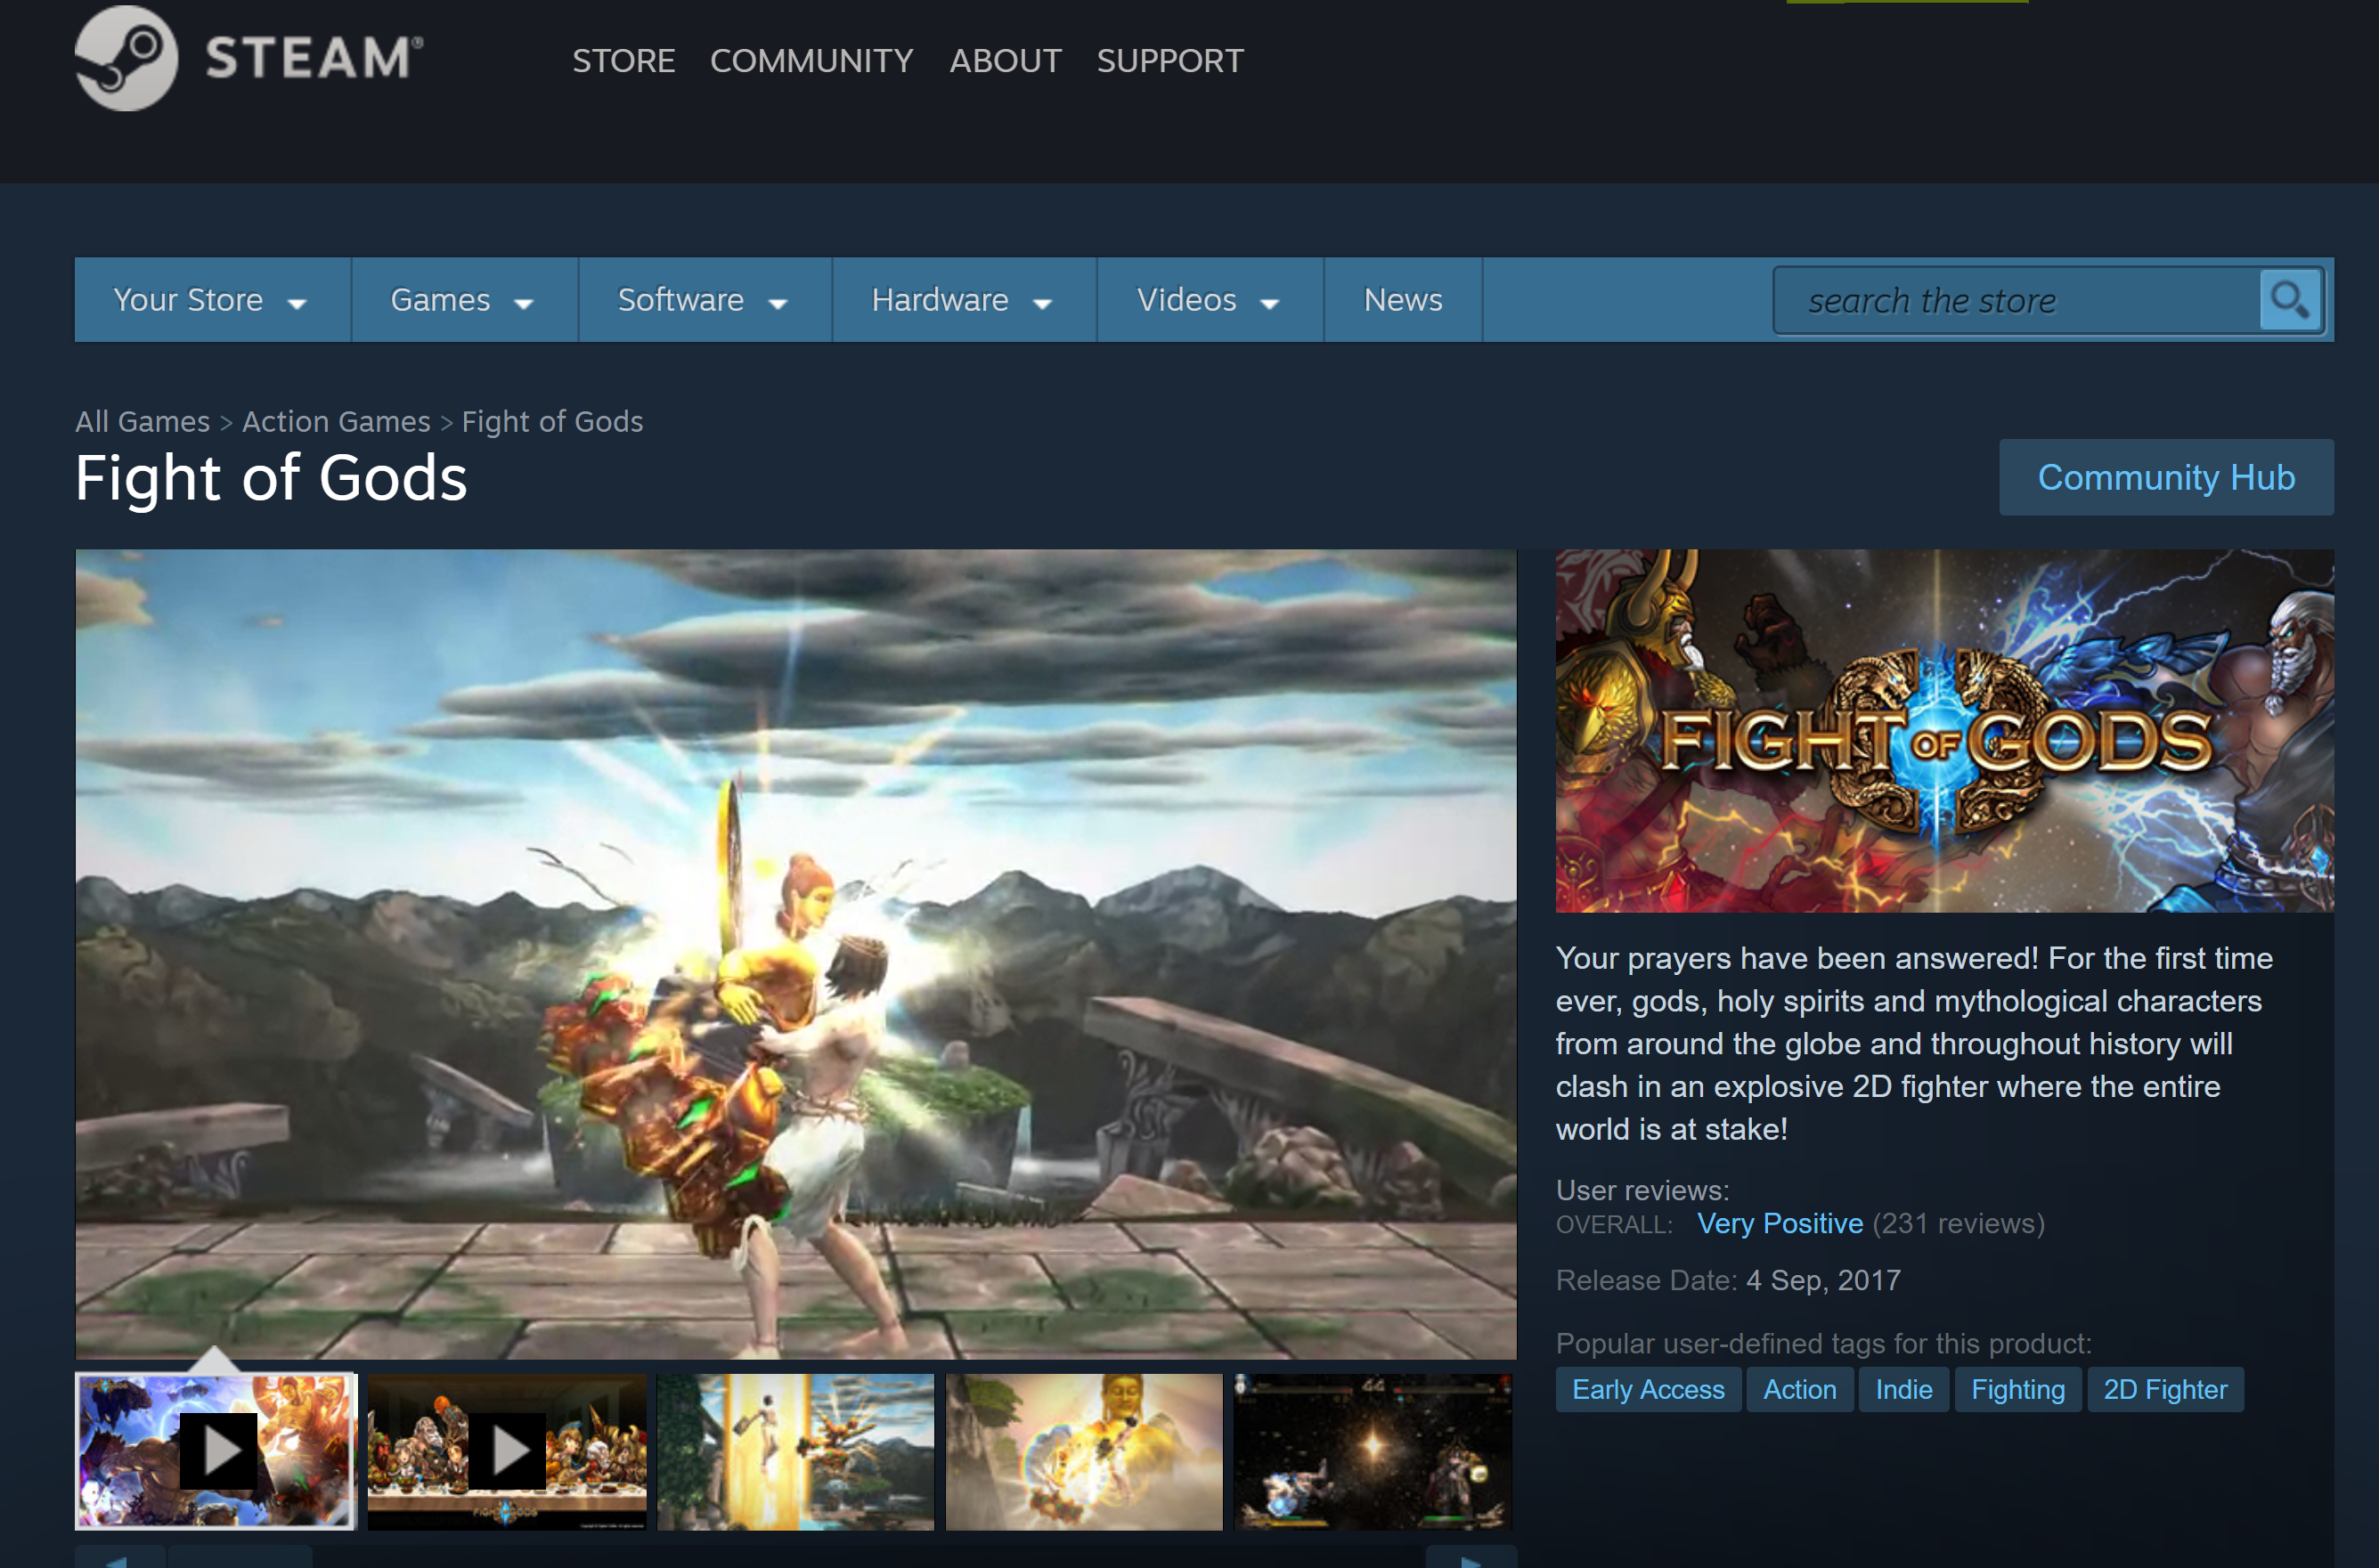 Malaysia has lifted the block on Steam after Fight of Gods is